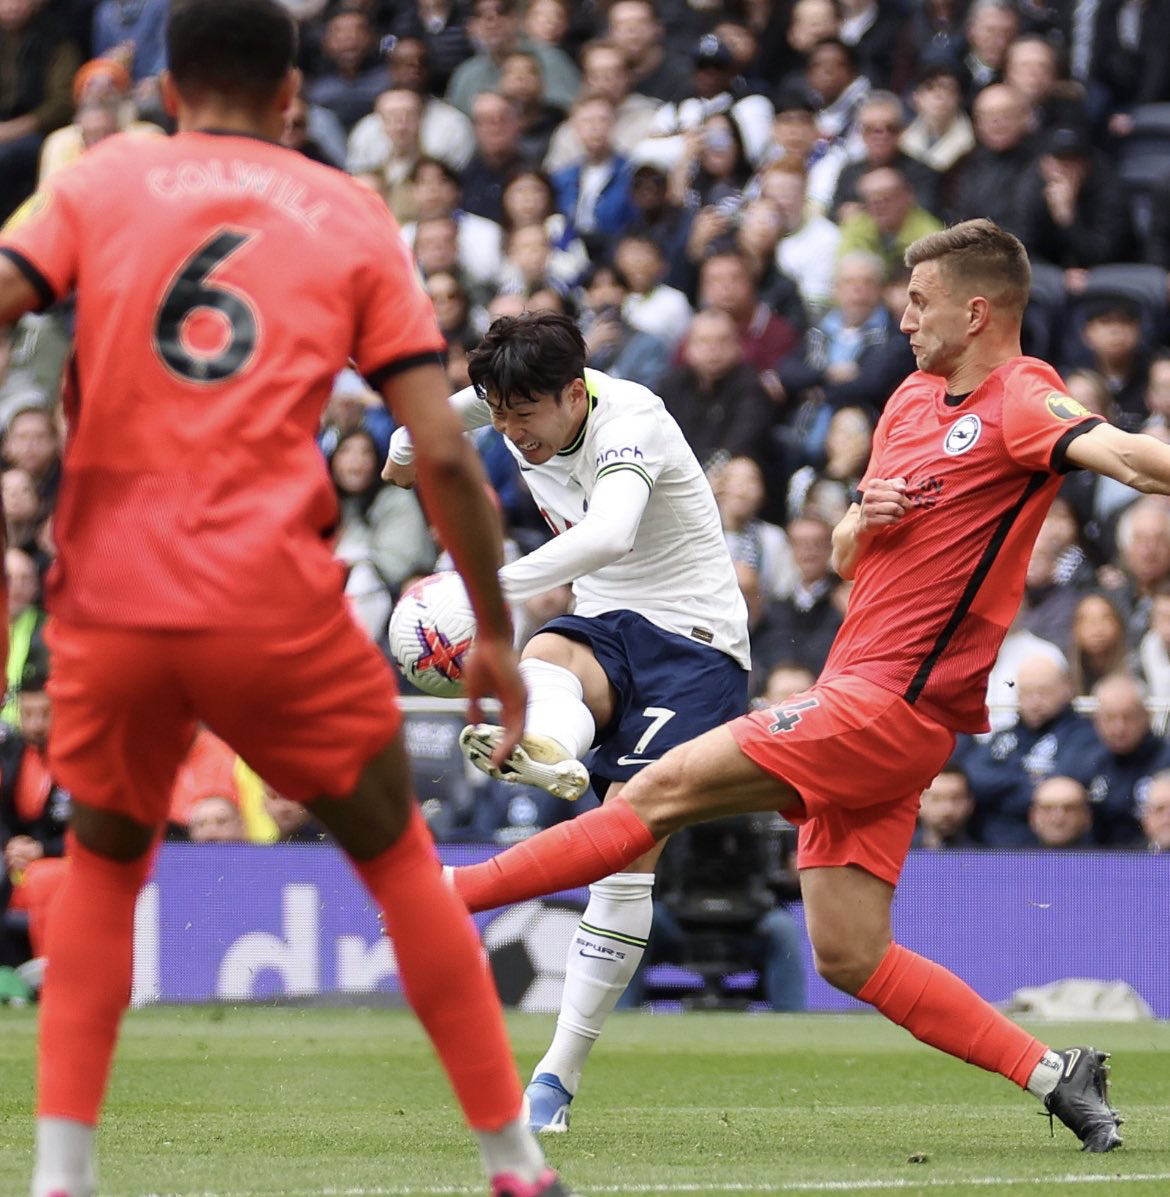 Son Heung-min shoots for his 100th Premier League goal in the game against Brighton.